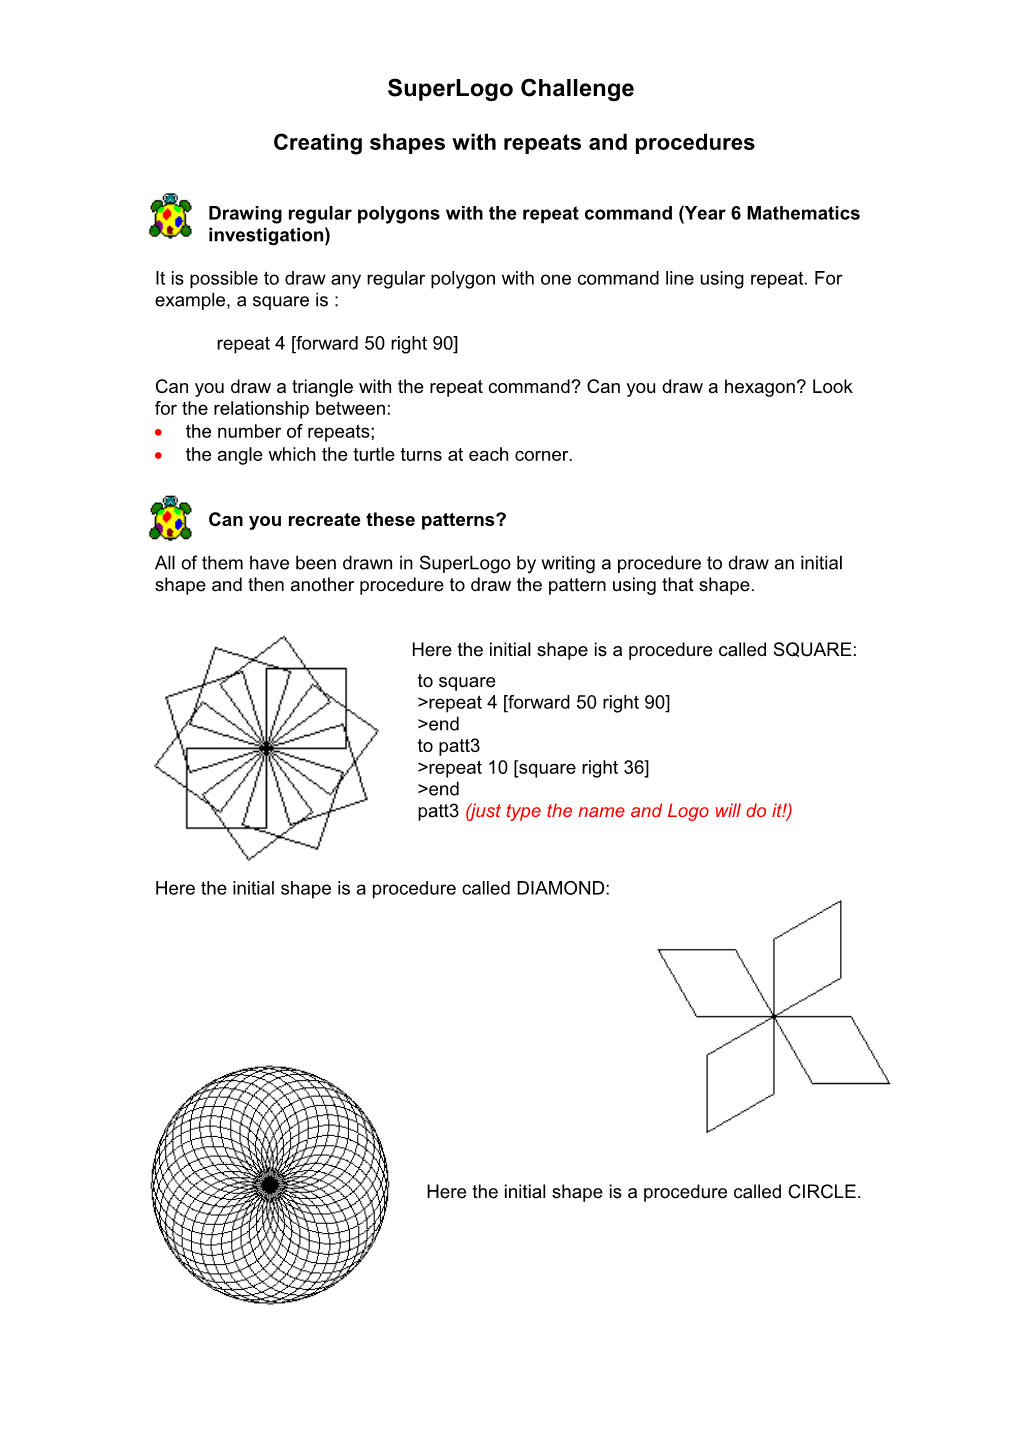 Drawing Regular Polygons with the Repeat Command (Year 6 Mathematics Investigation)